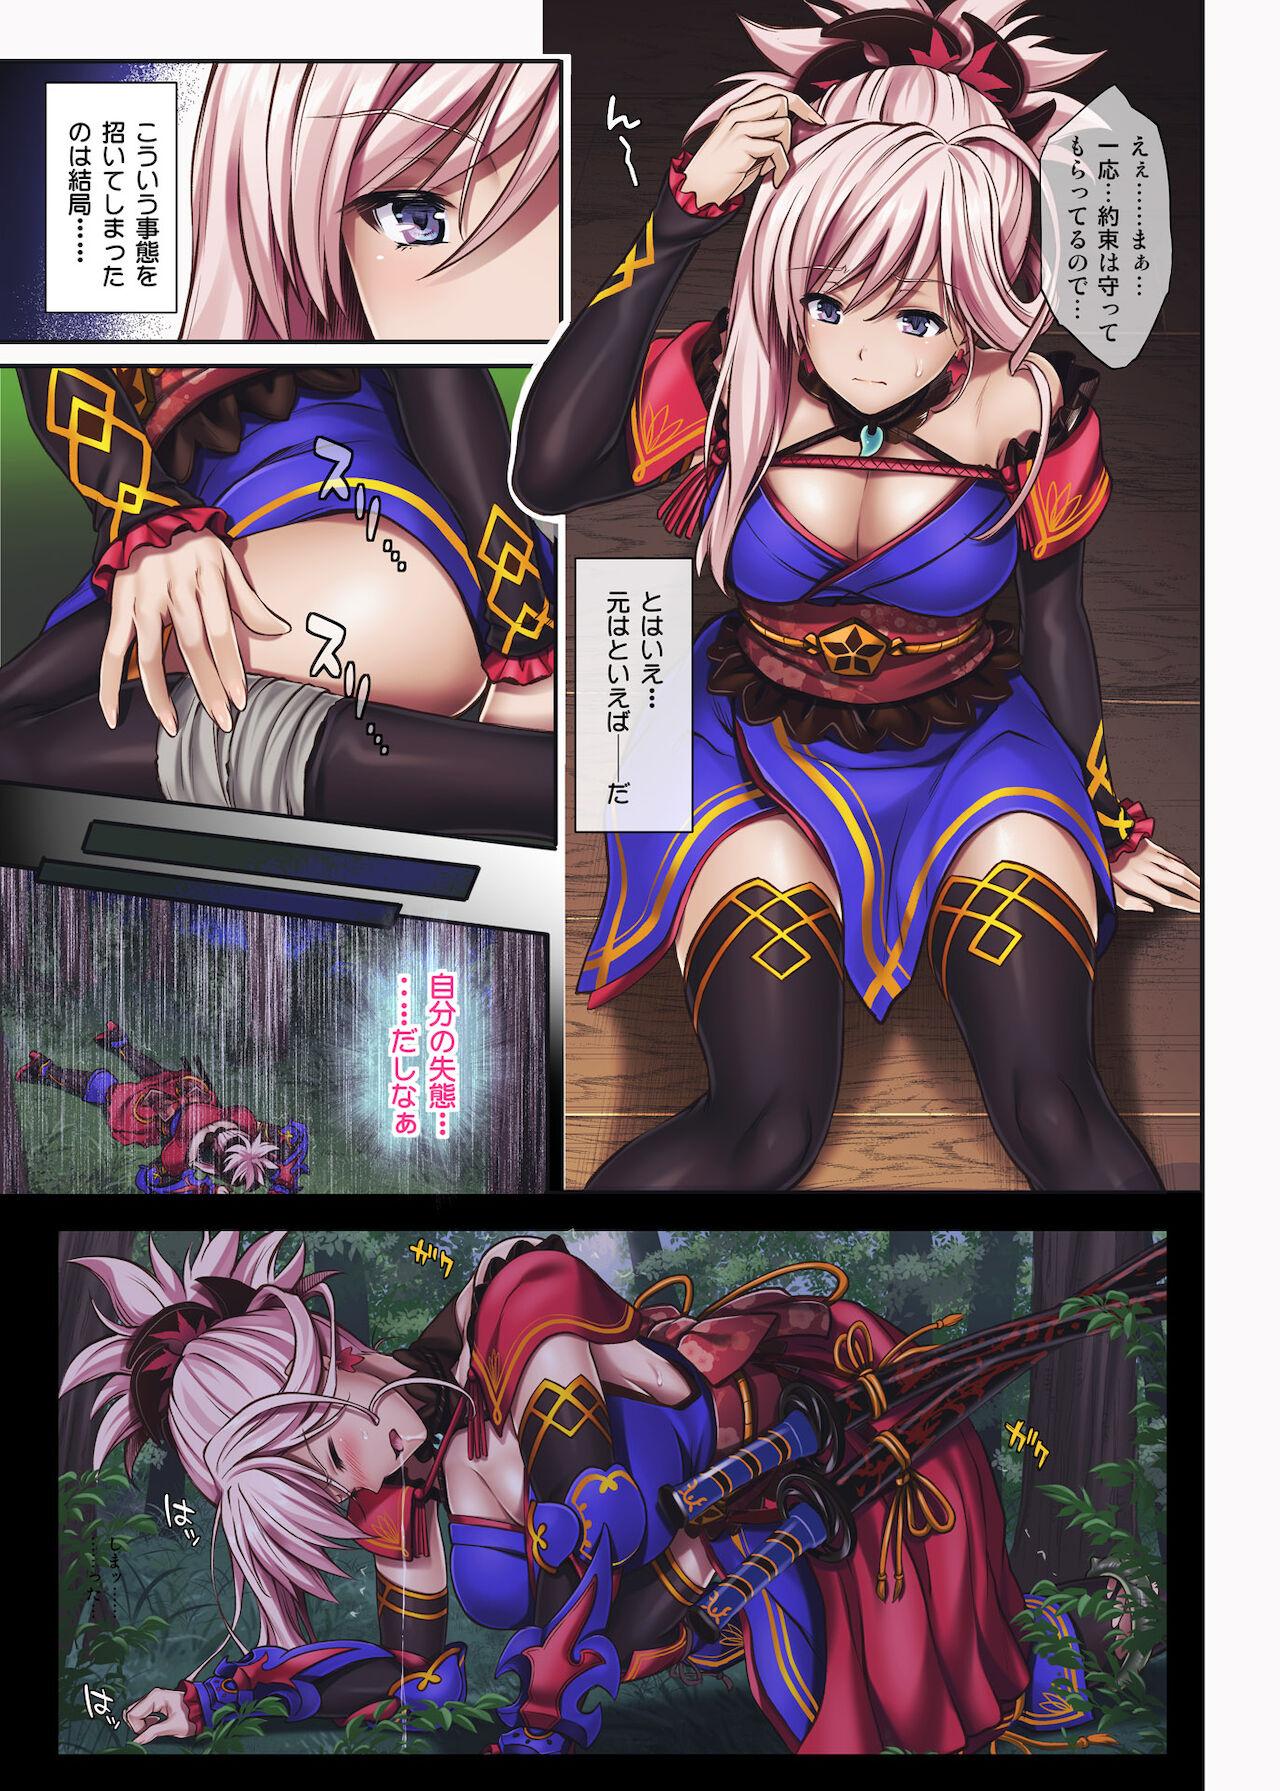 Pink Cyclone no Doujinshi Full Color Pack 4 - Fate grand order Grande - Page 6